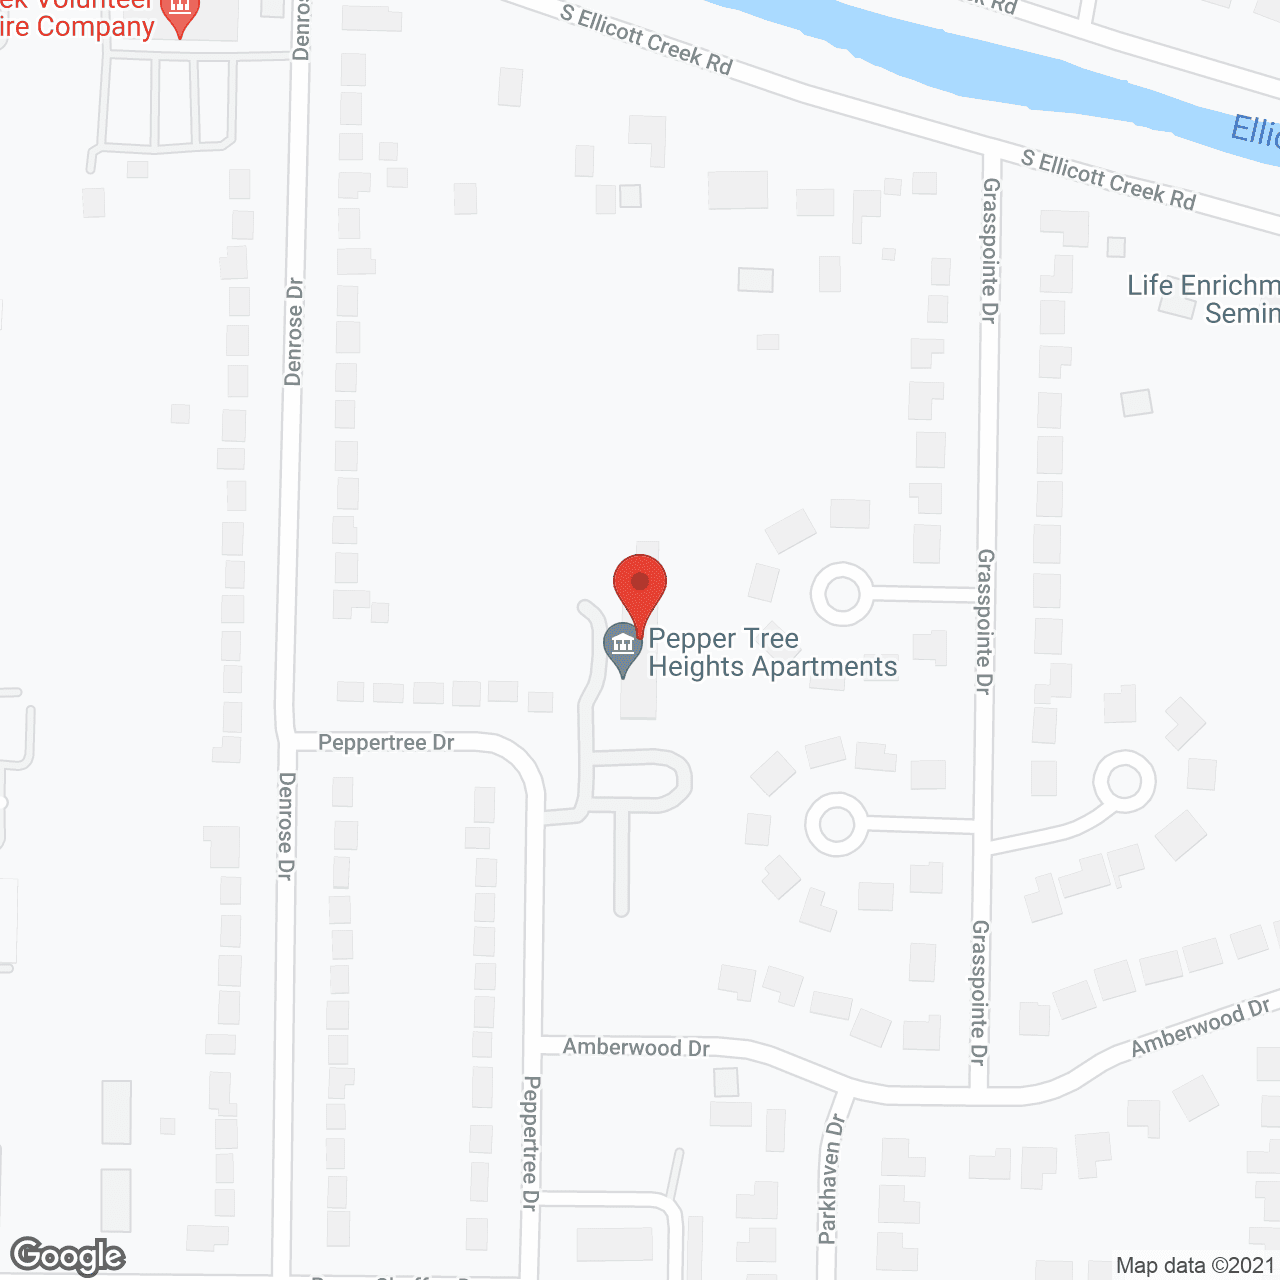 Pepper Tree Heights Apartments in google map